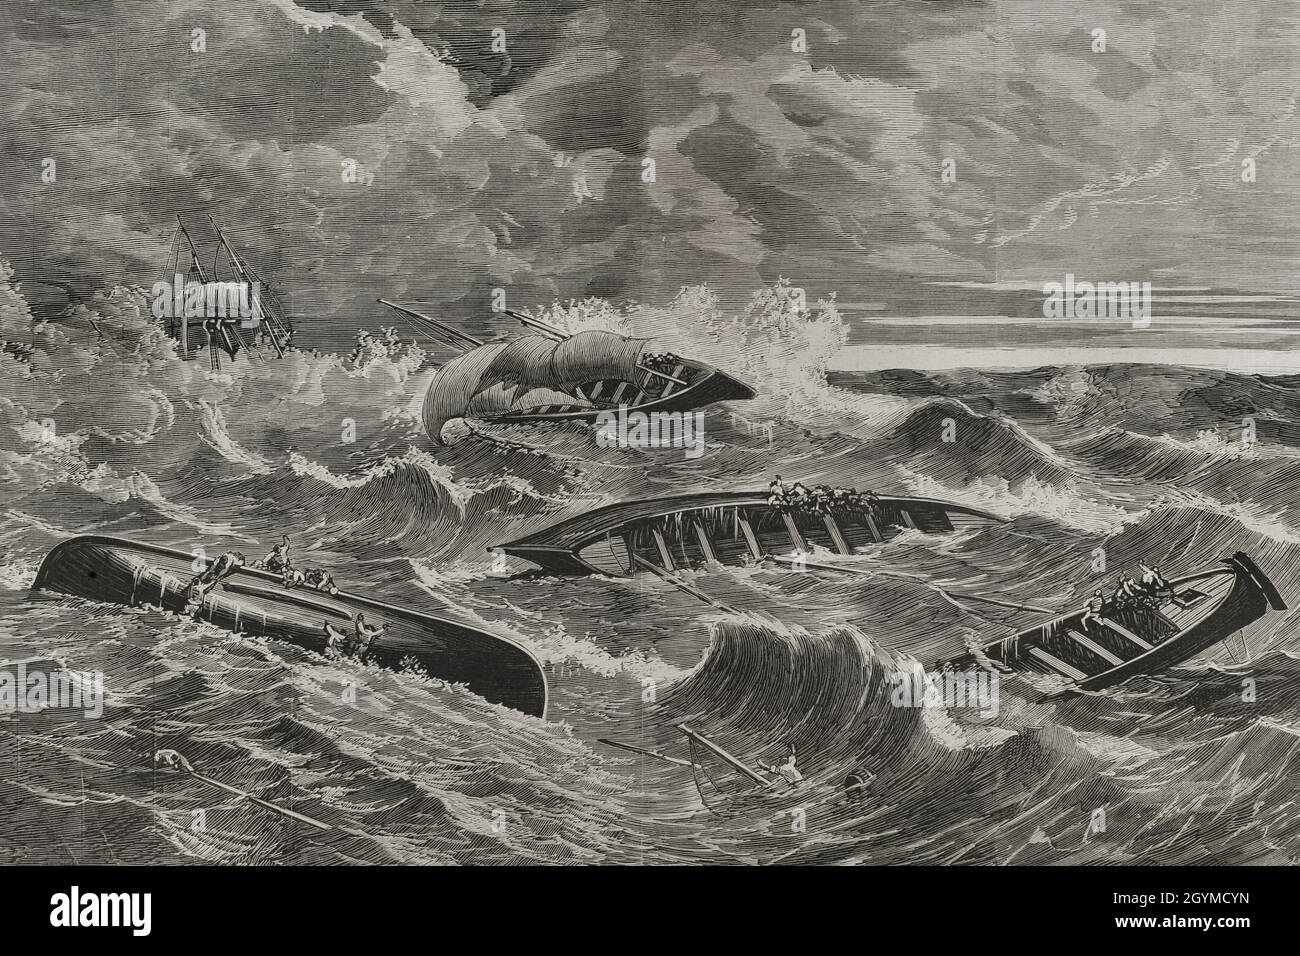 Wreck of fishing boats on the coast of the Cantabrian Sea, caused by the 'galerna' (violent storm with strong wind), on April 20, 1878. Bermeo, Basque Country, Spain. Illustration by Rafael Monleón. Engraving by Rico. La Ilustración Española y Americana, 1878. Stock Photo